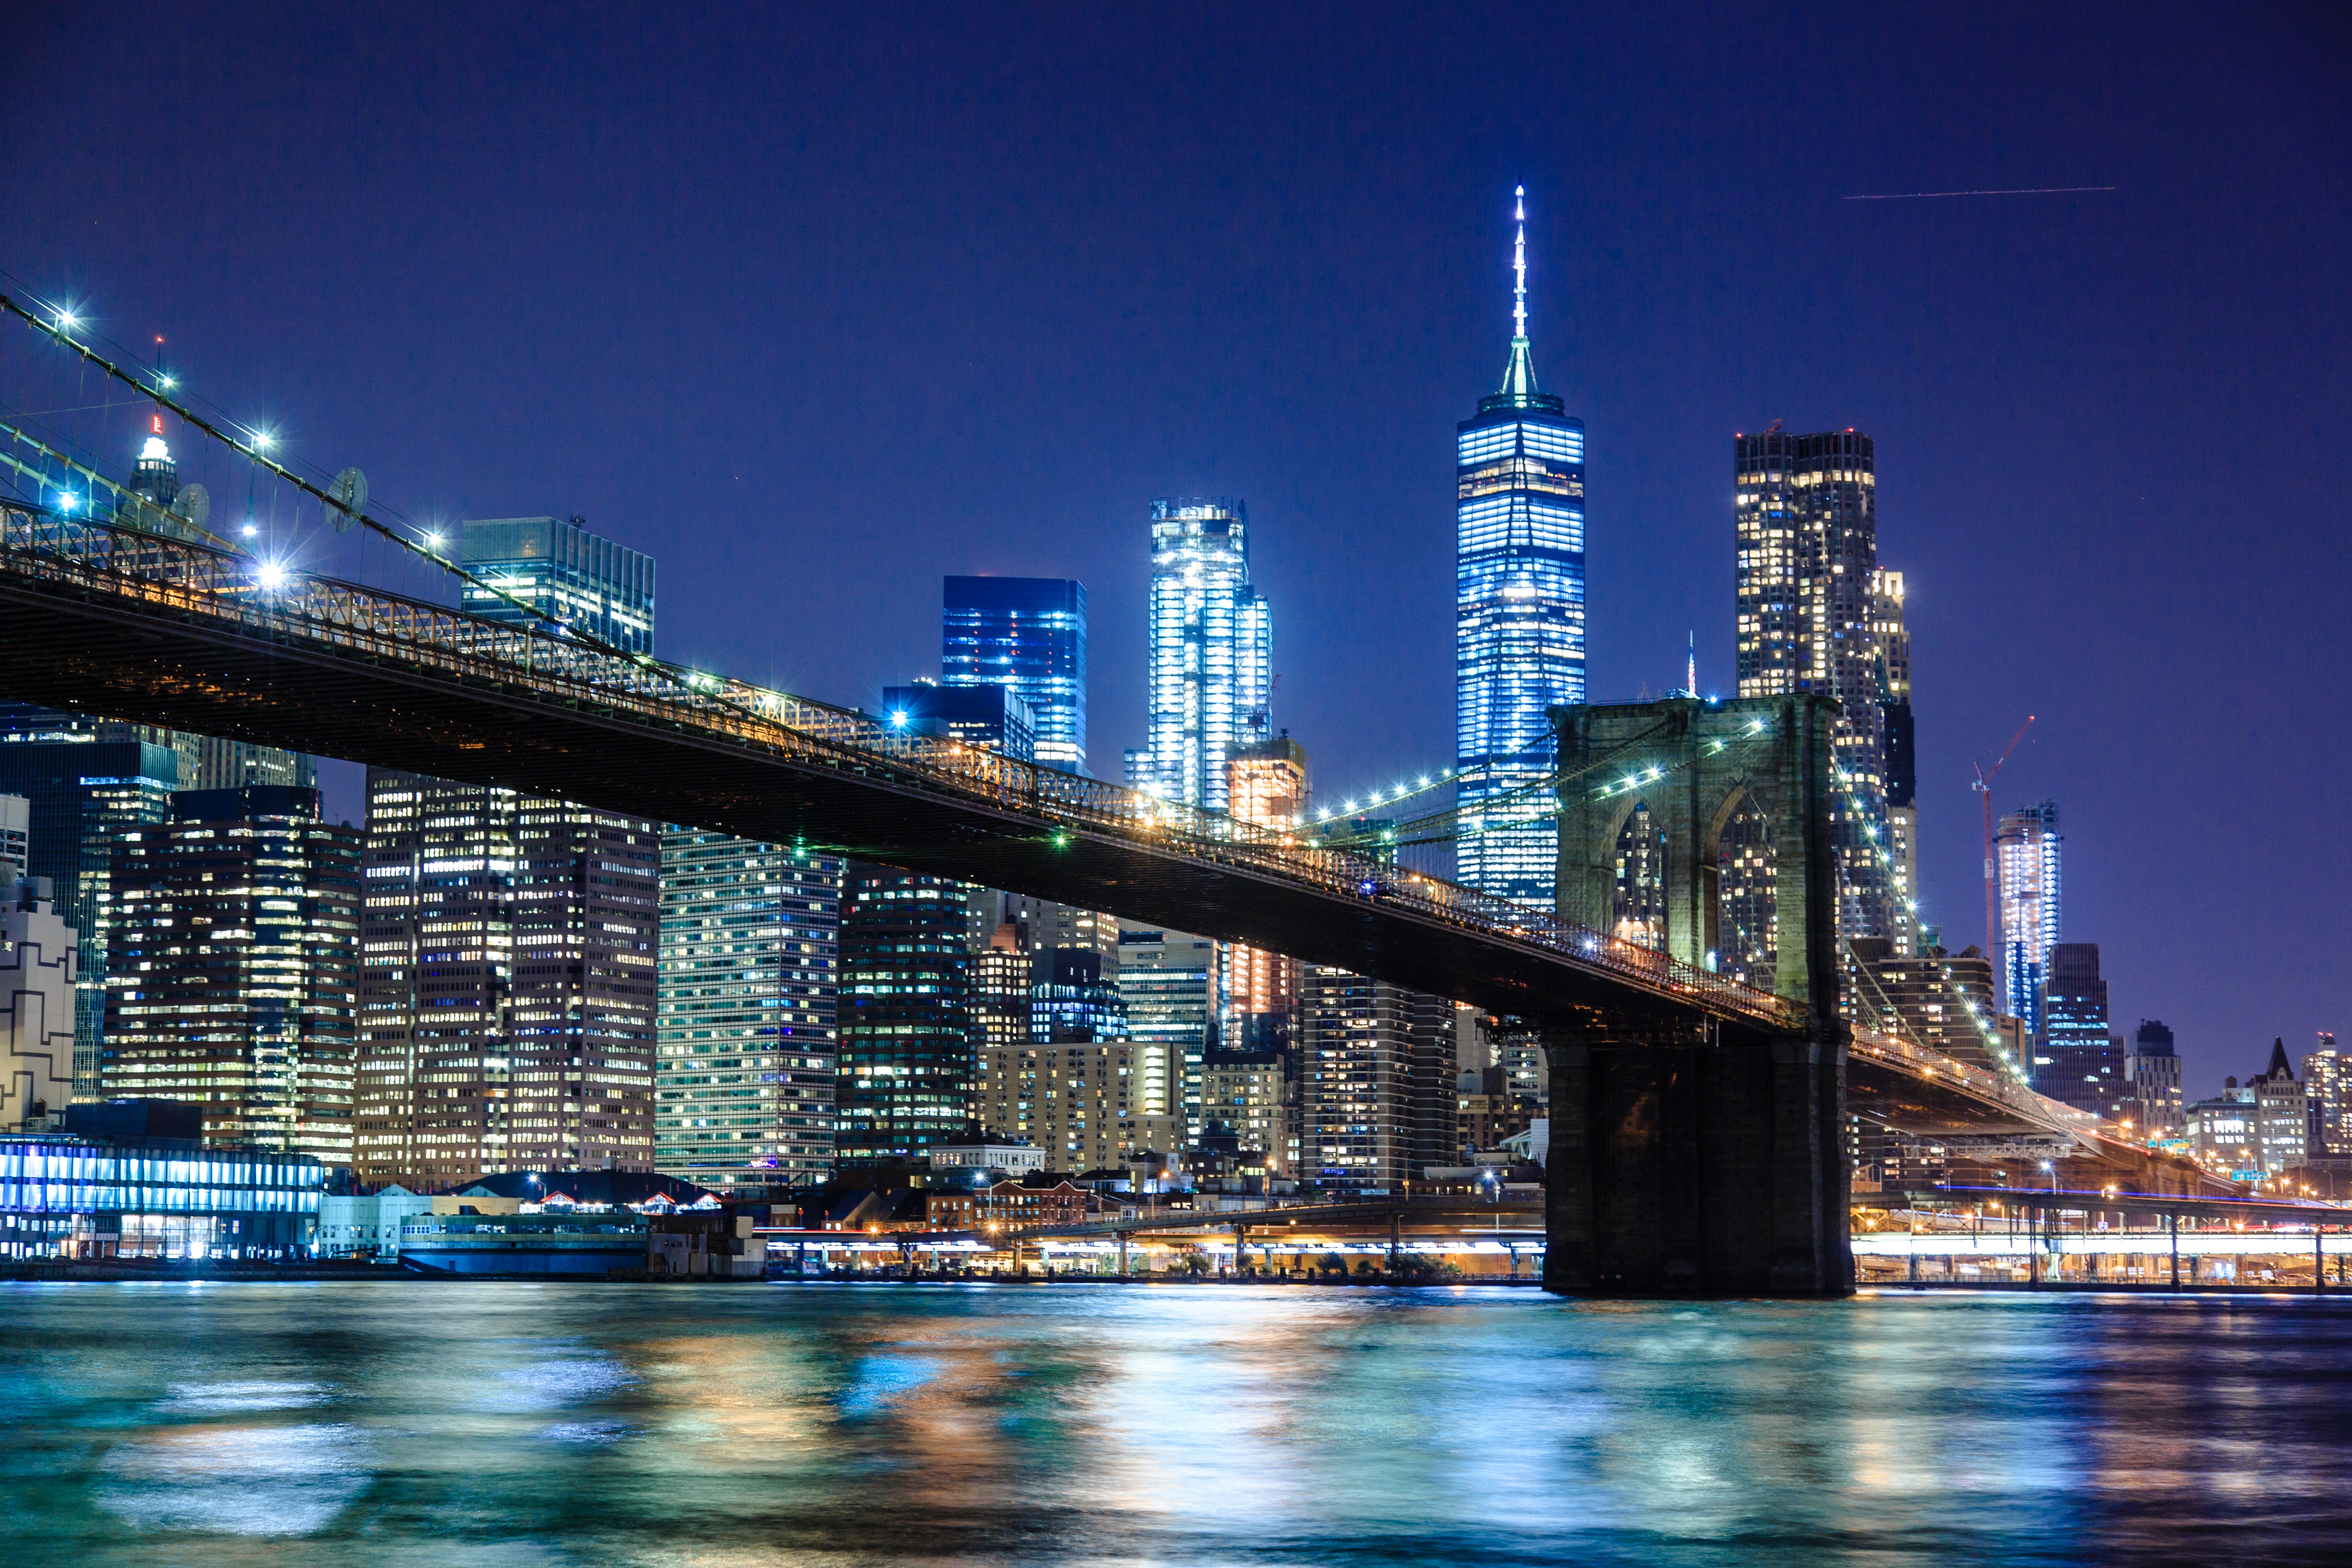 A night time view of the Brooklyn Bridge and the Lower Manhattan skyline. - New York